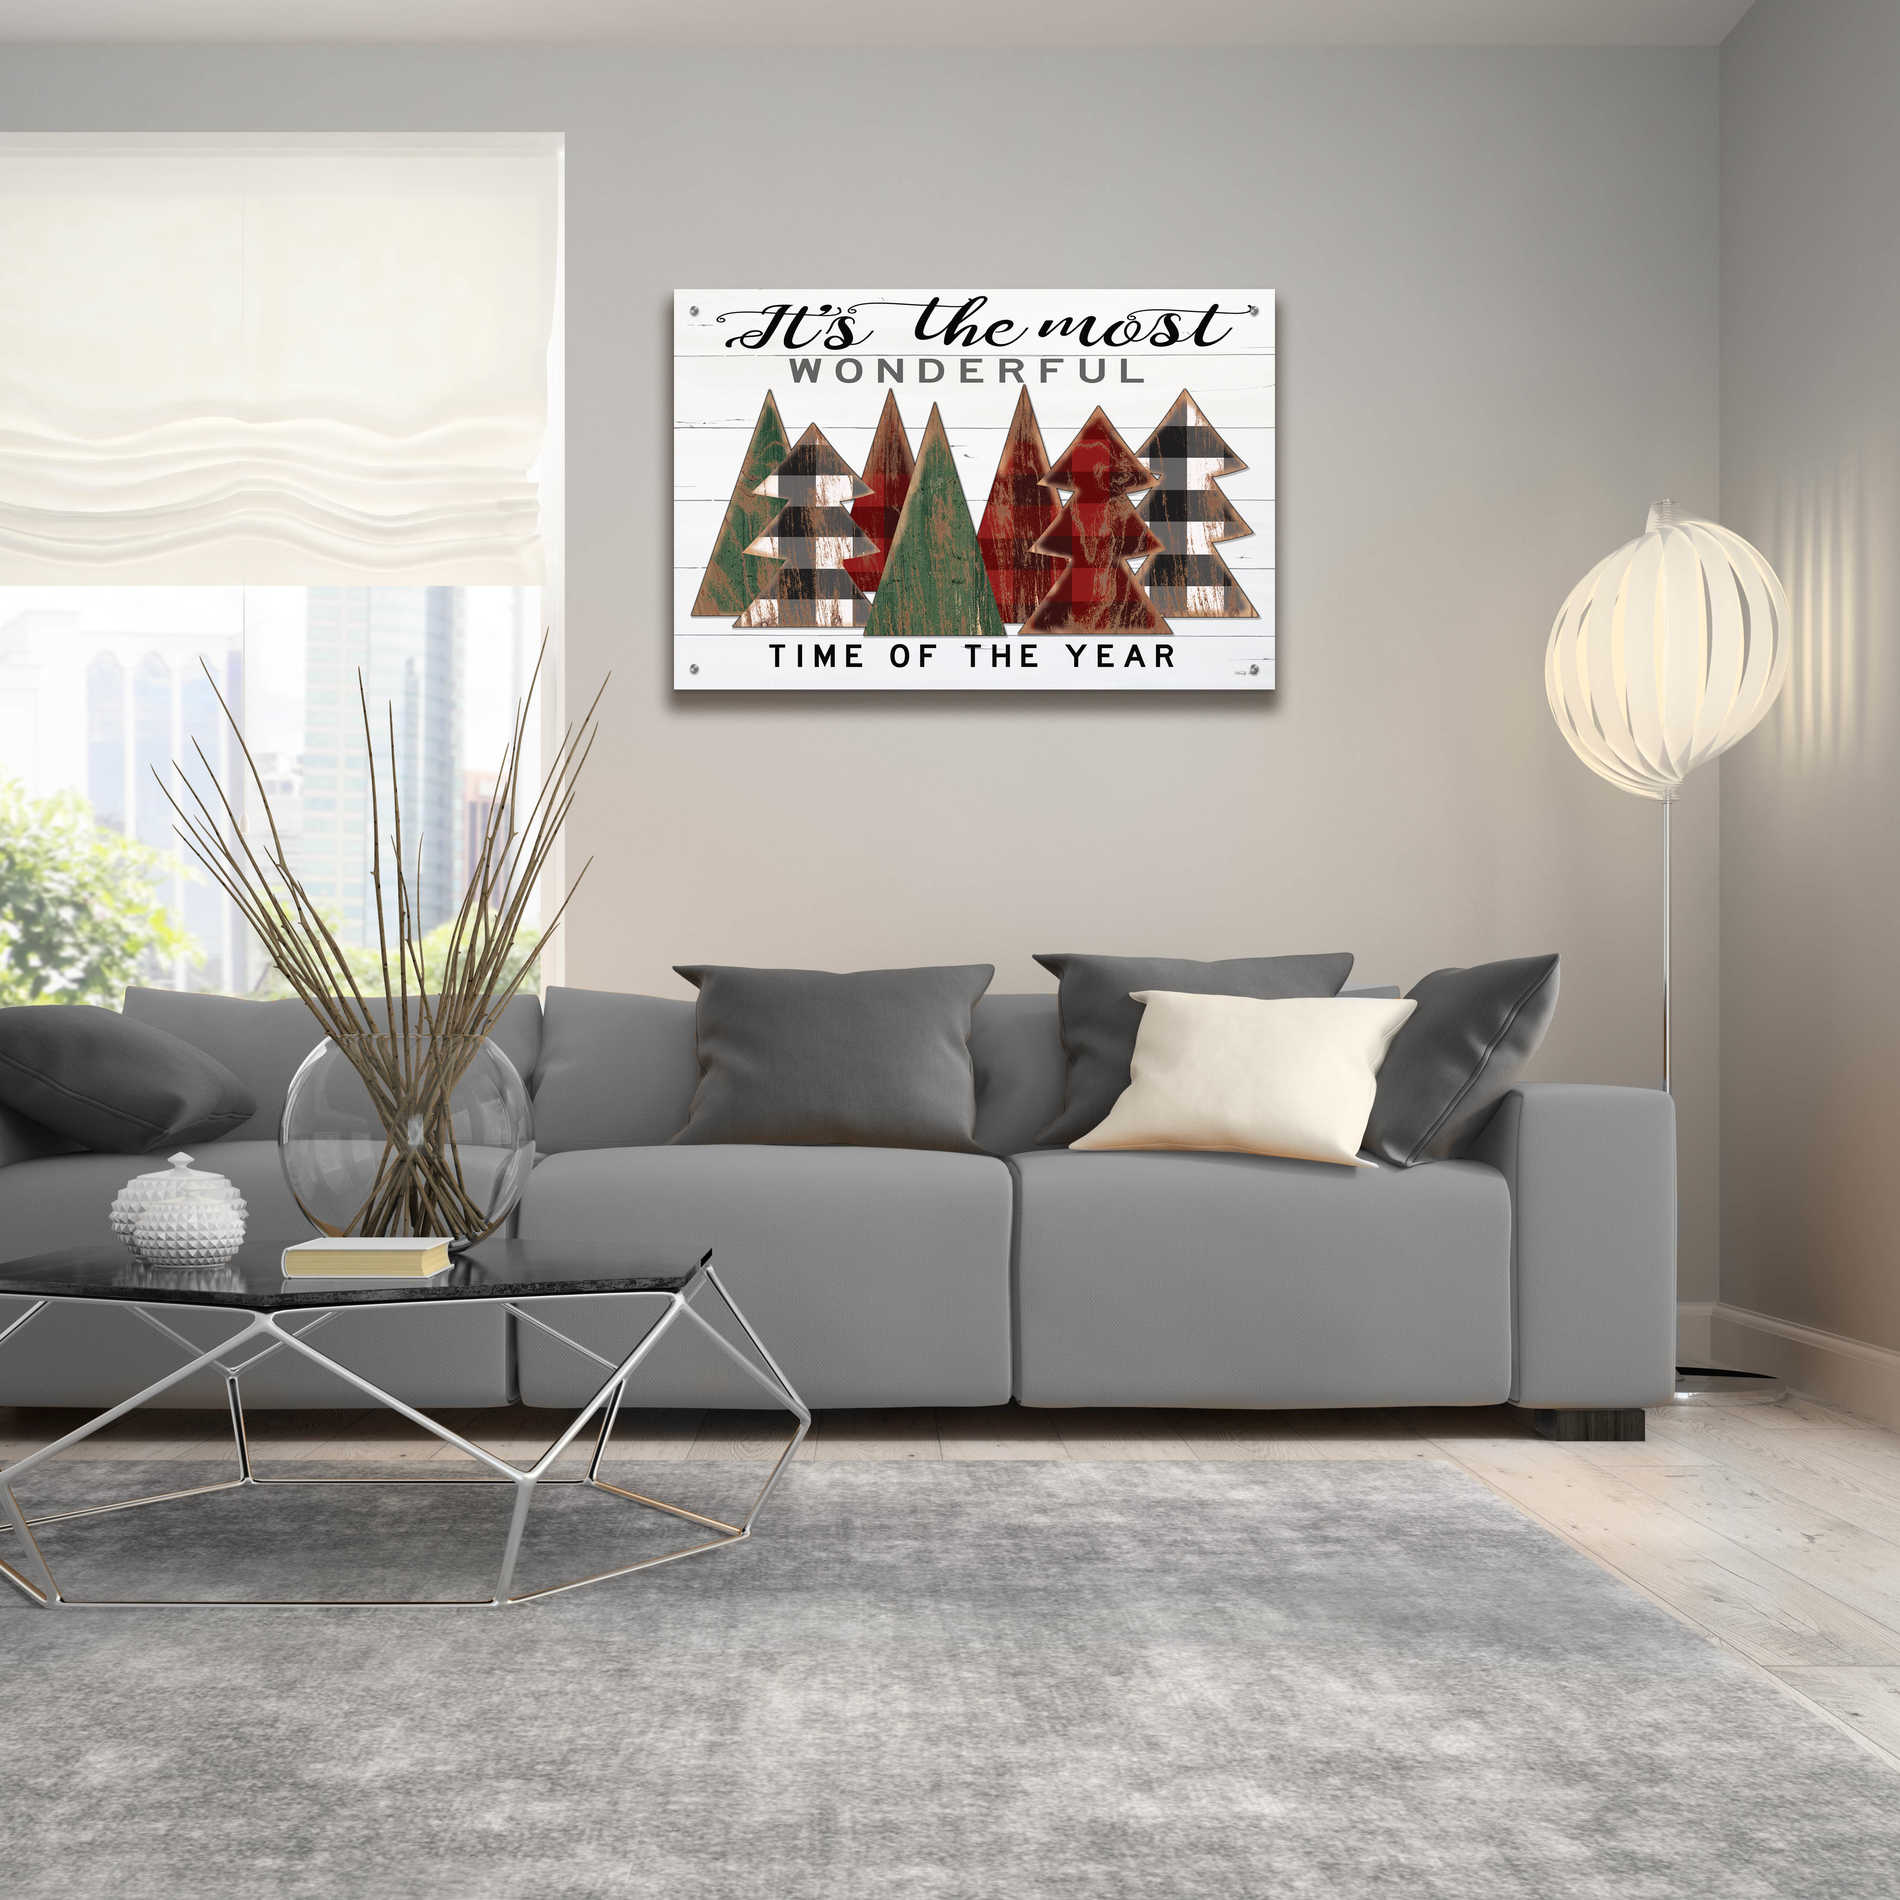 Epic Art 'It's the Most Wonderful Time Plaid Trees' by Cindy Jacobs, Acrylic Glass Wall Art,36x24